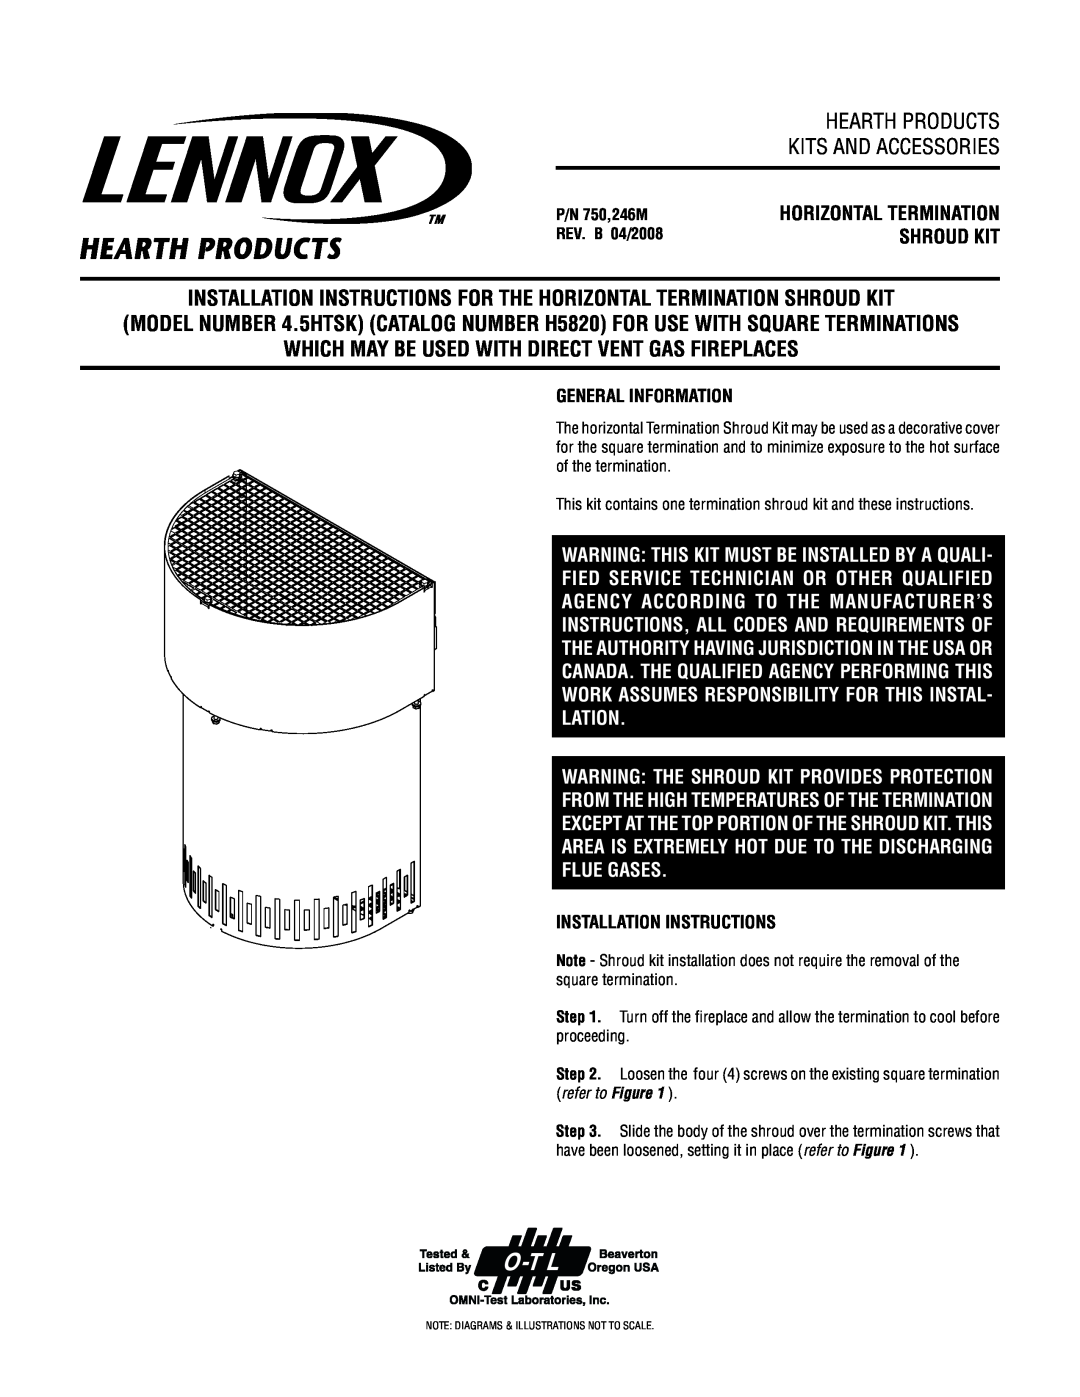 Lennox Hearth 4.5HTSK installation instructions Which May Be Used With Direct Vent Gas Fireplaces, General Information 